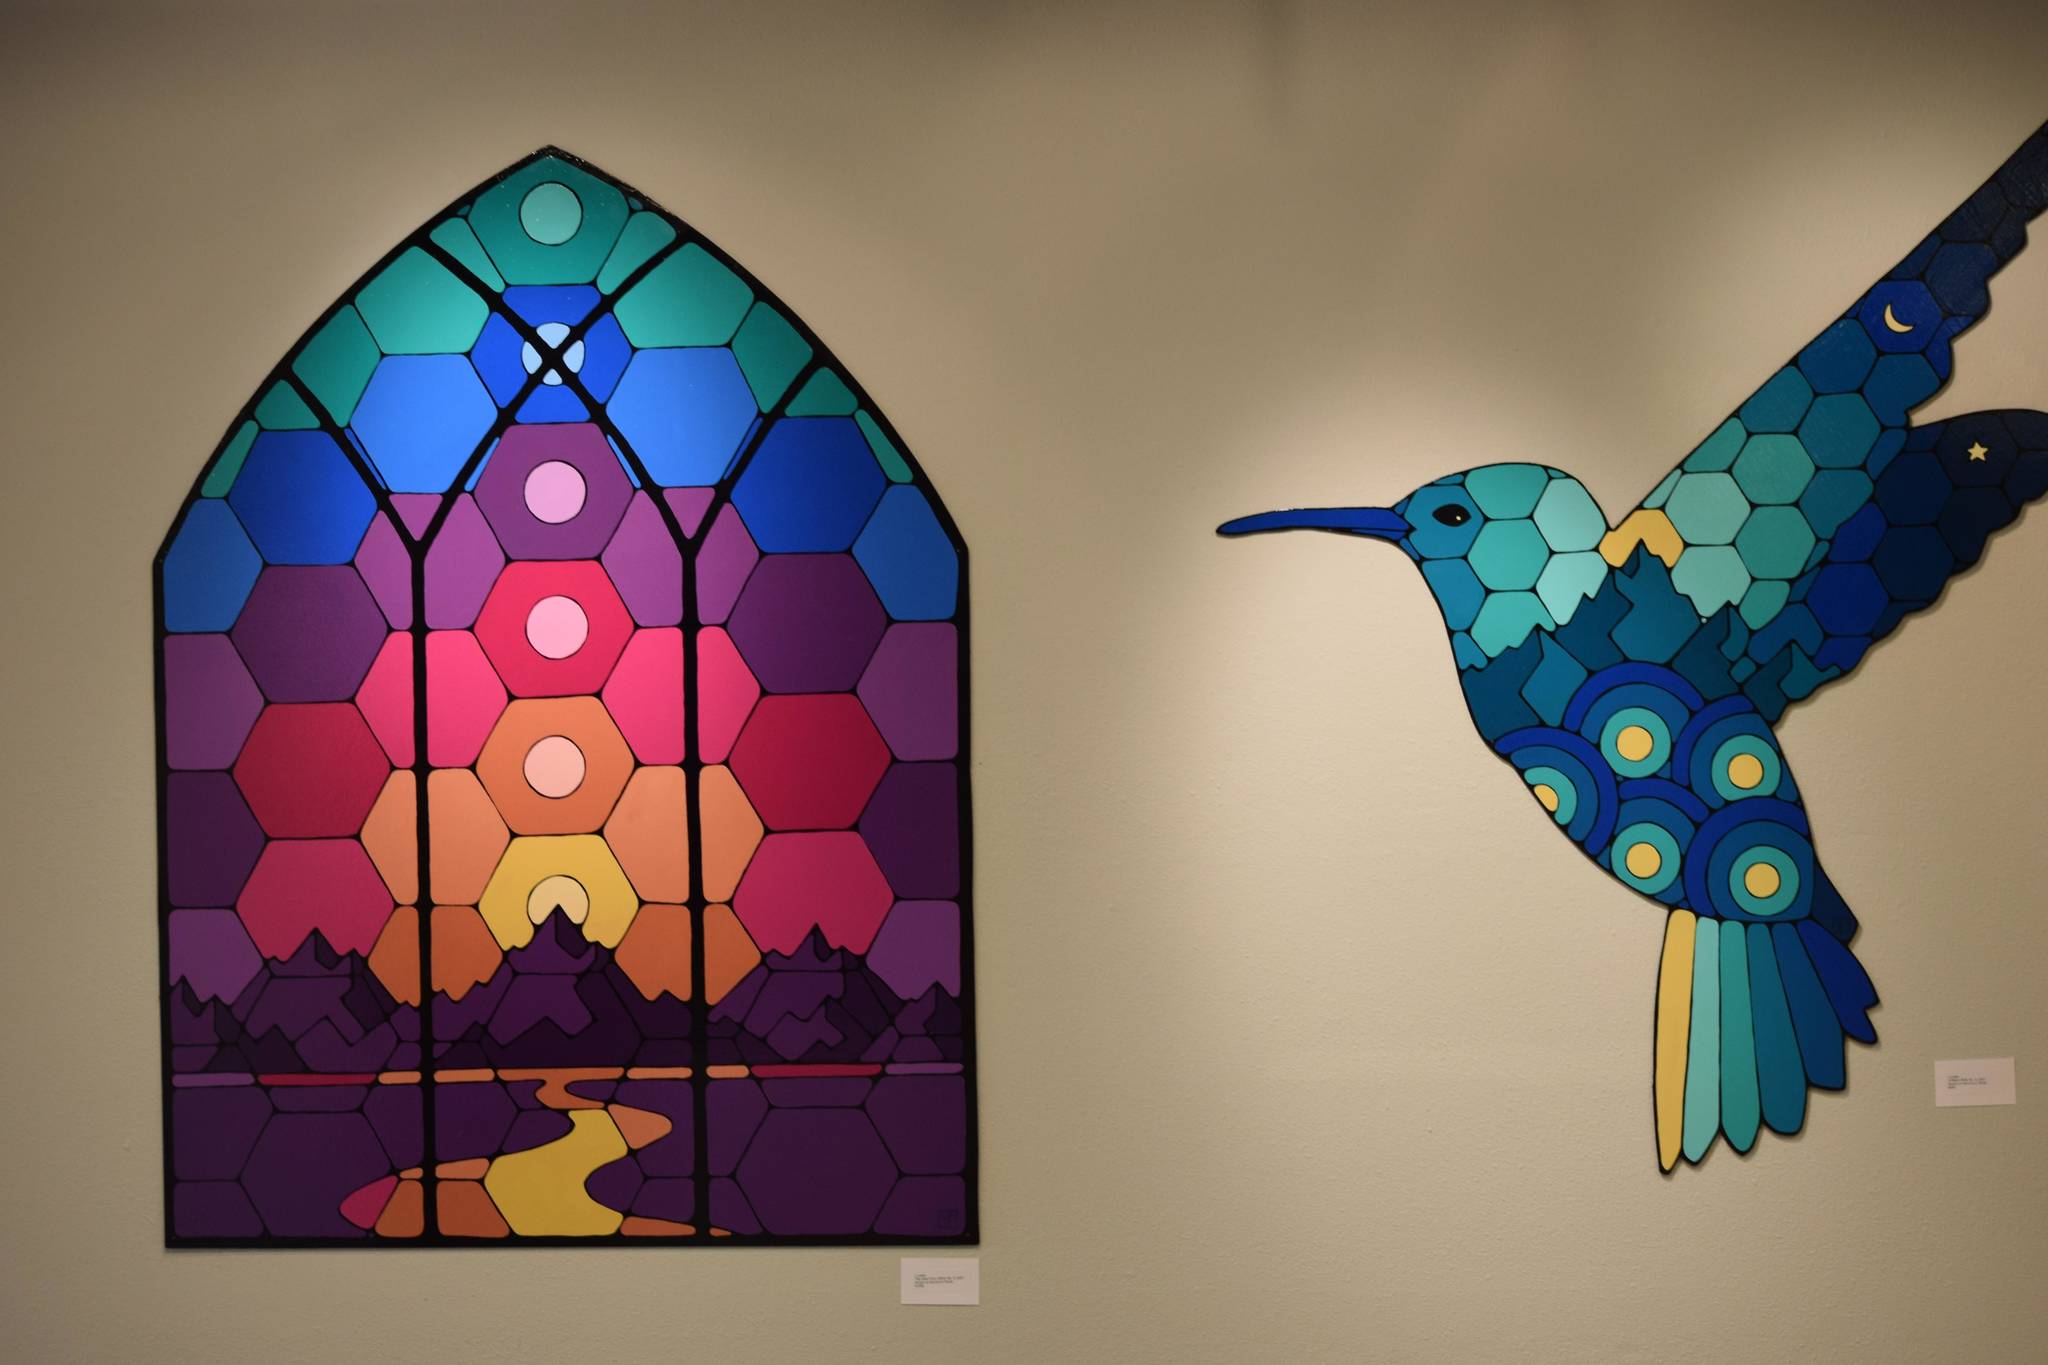 Pieces are on display at the Kenai Art Center on August 4,2021 for this month's "Illuminations" exhibition. (Camille Botello / Peninsula Clarion)